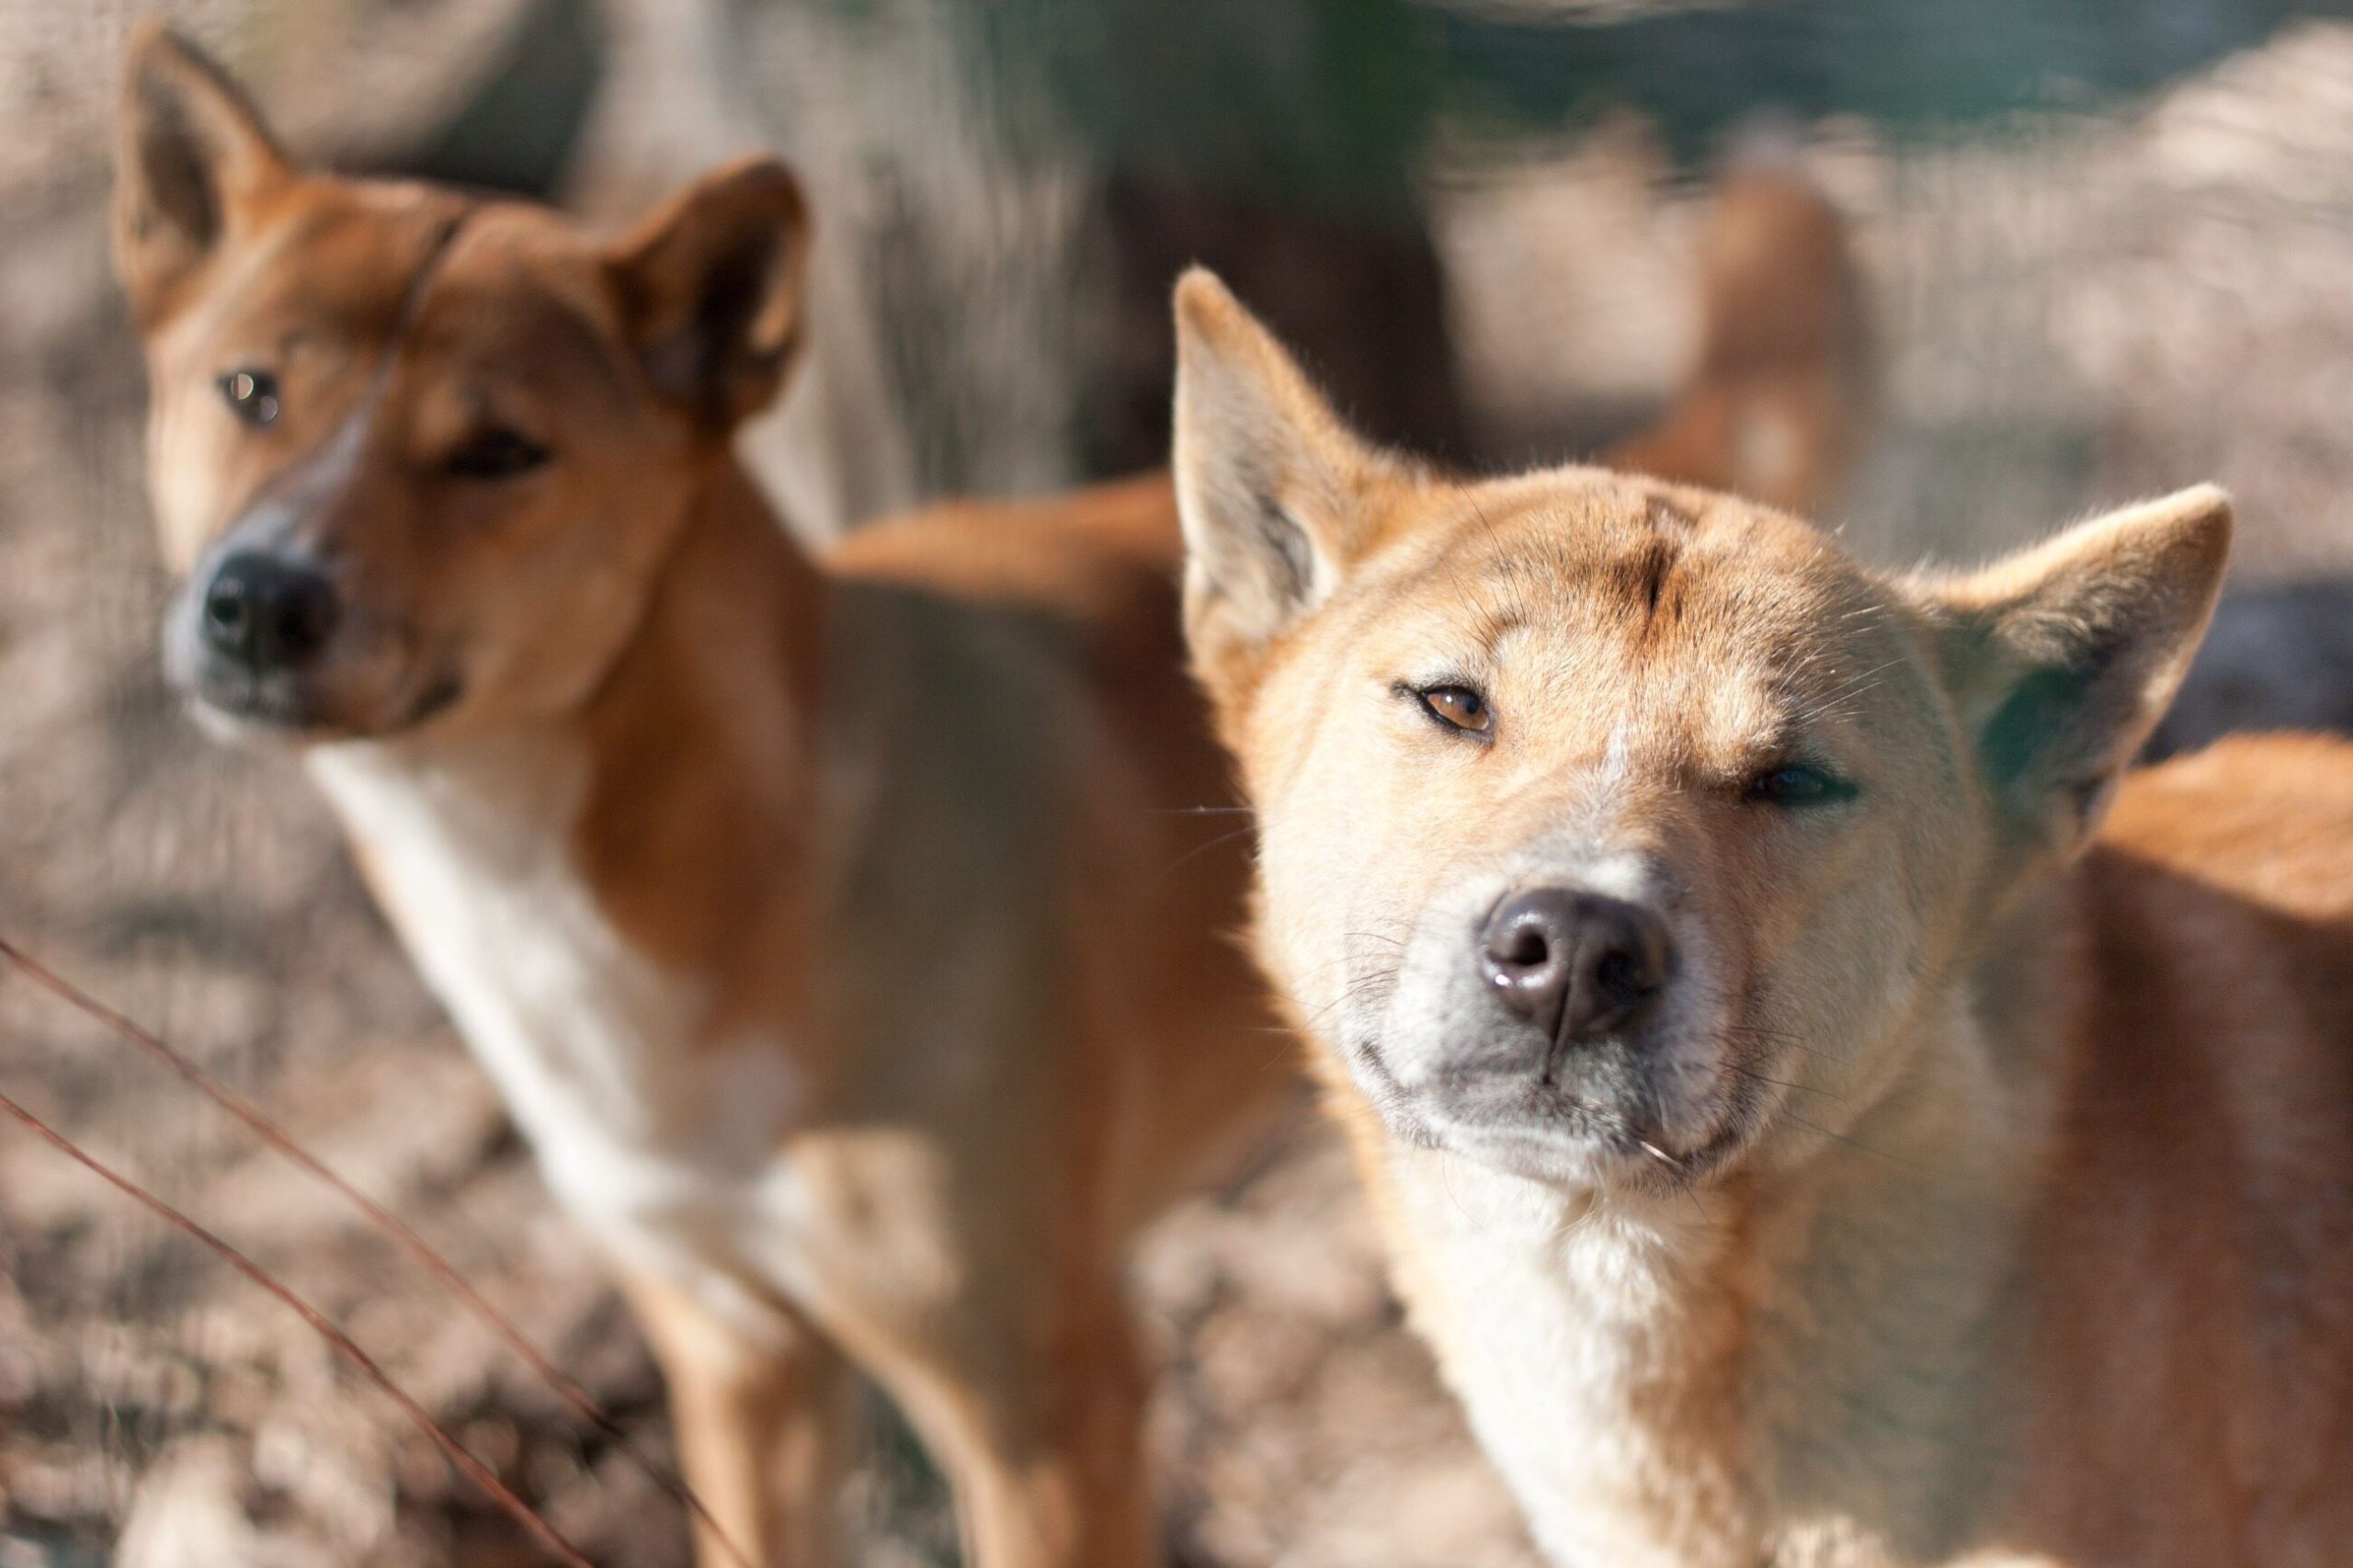 New Guinea Singing Dog Survives in the Wild!  The herd was found after 50 years